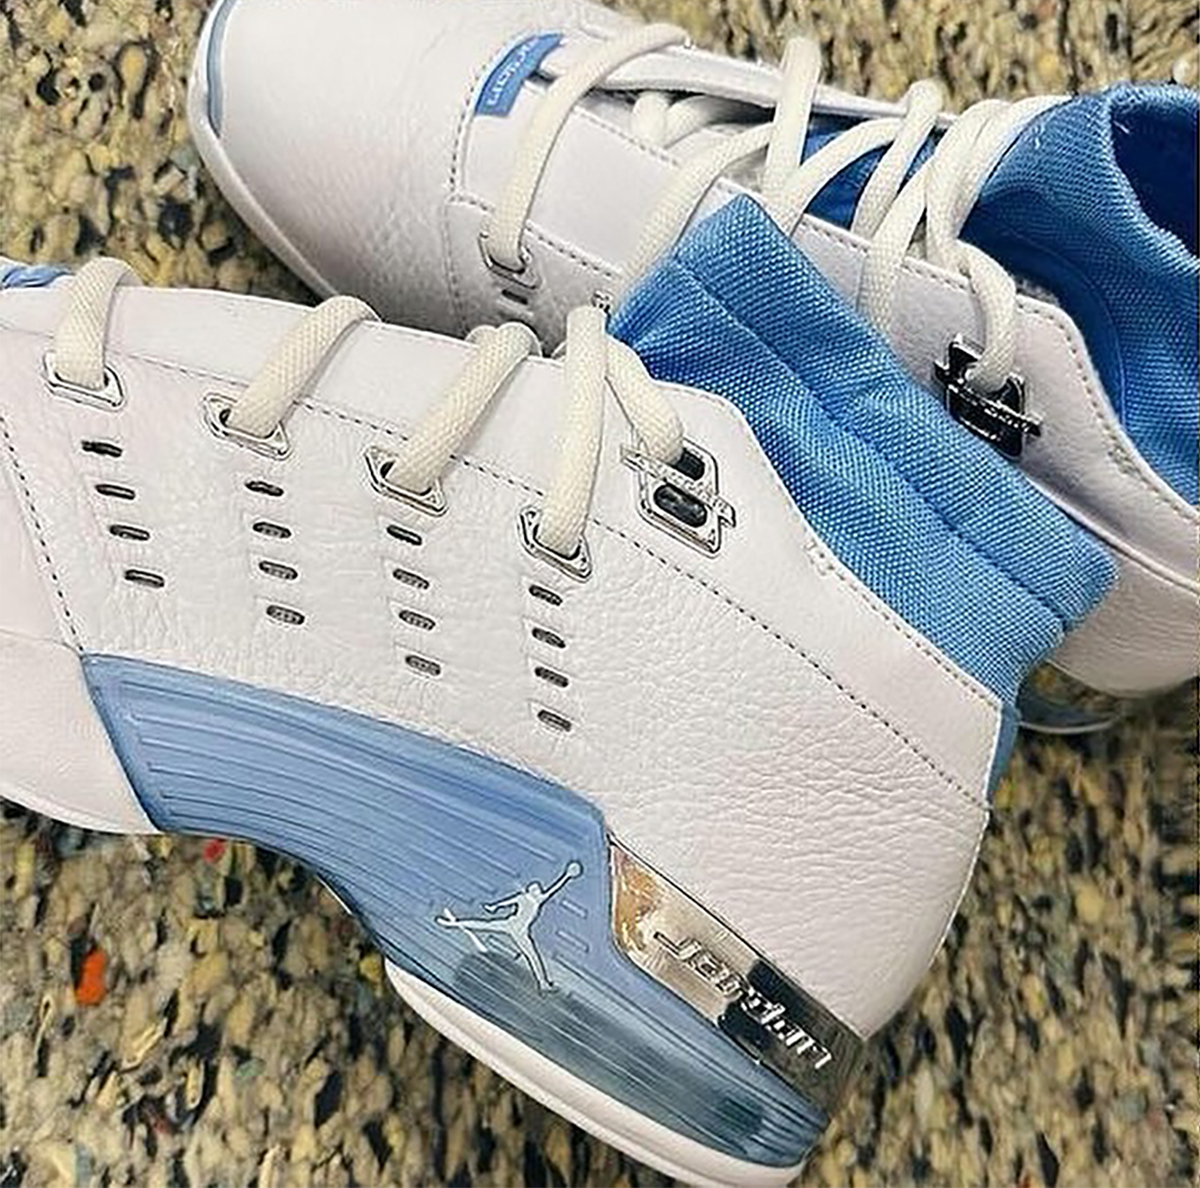 The Air Jordan 2 is currently undergoing a revival thanks to collaborations from Low Unc Fj0395 140 3